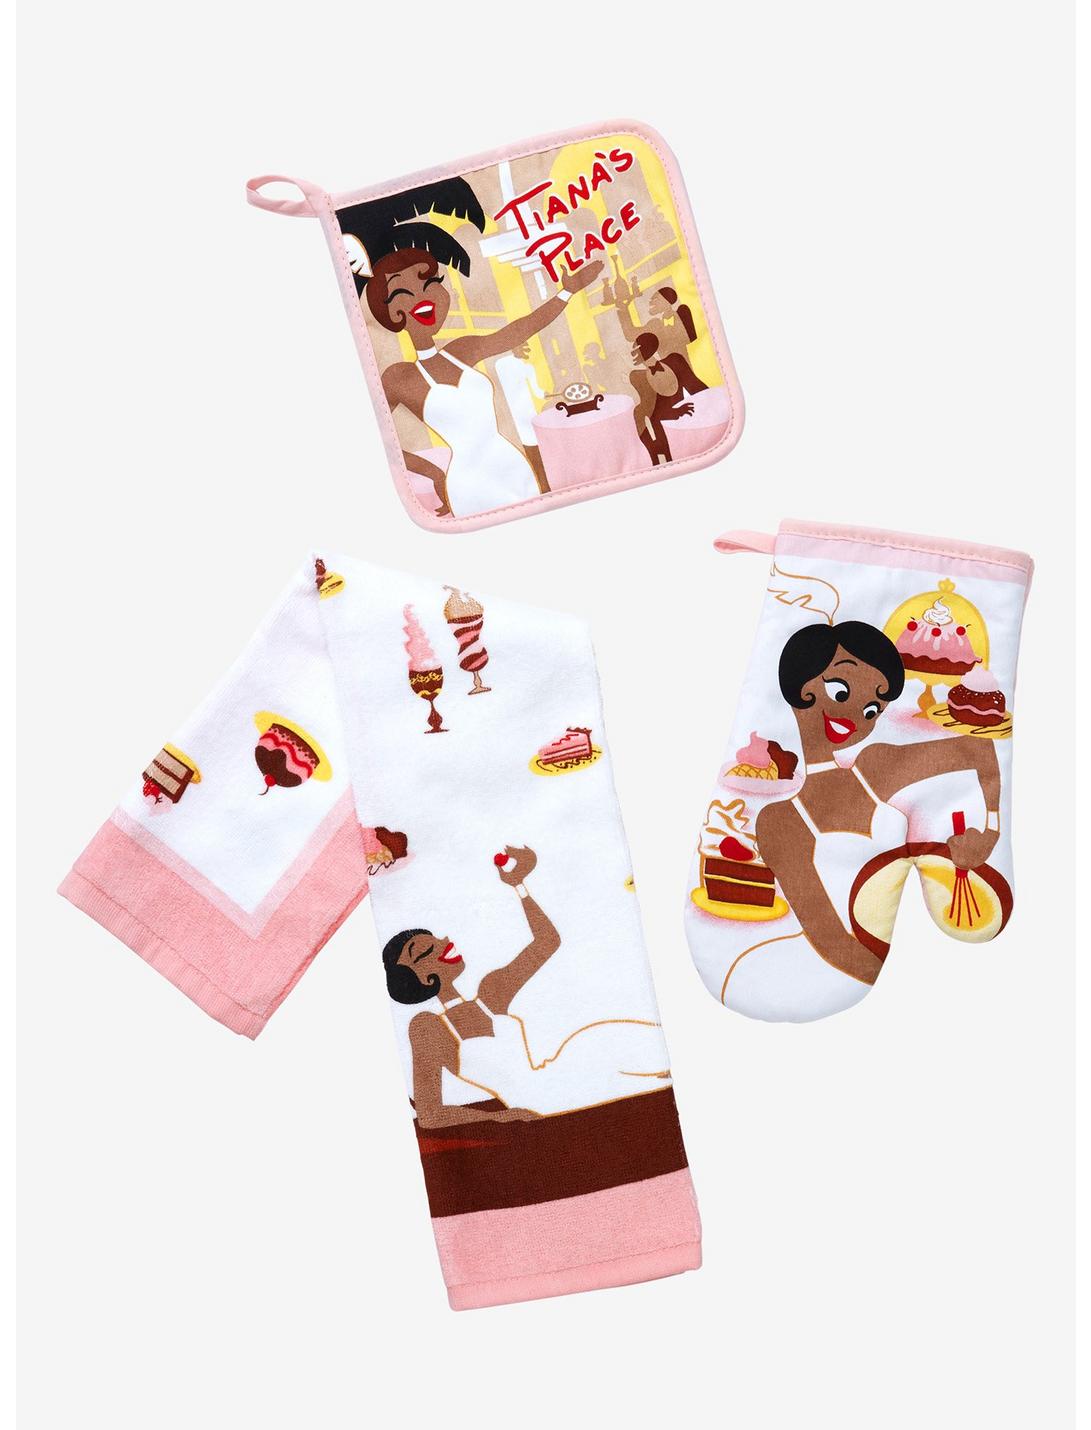 Disney The Princess and the Frog Tiana's Place Kitchen Set - BoxLunch Exclusive, , hi-res